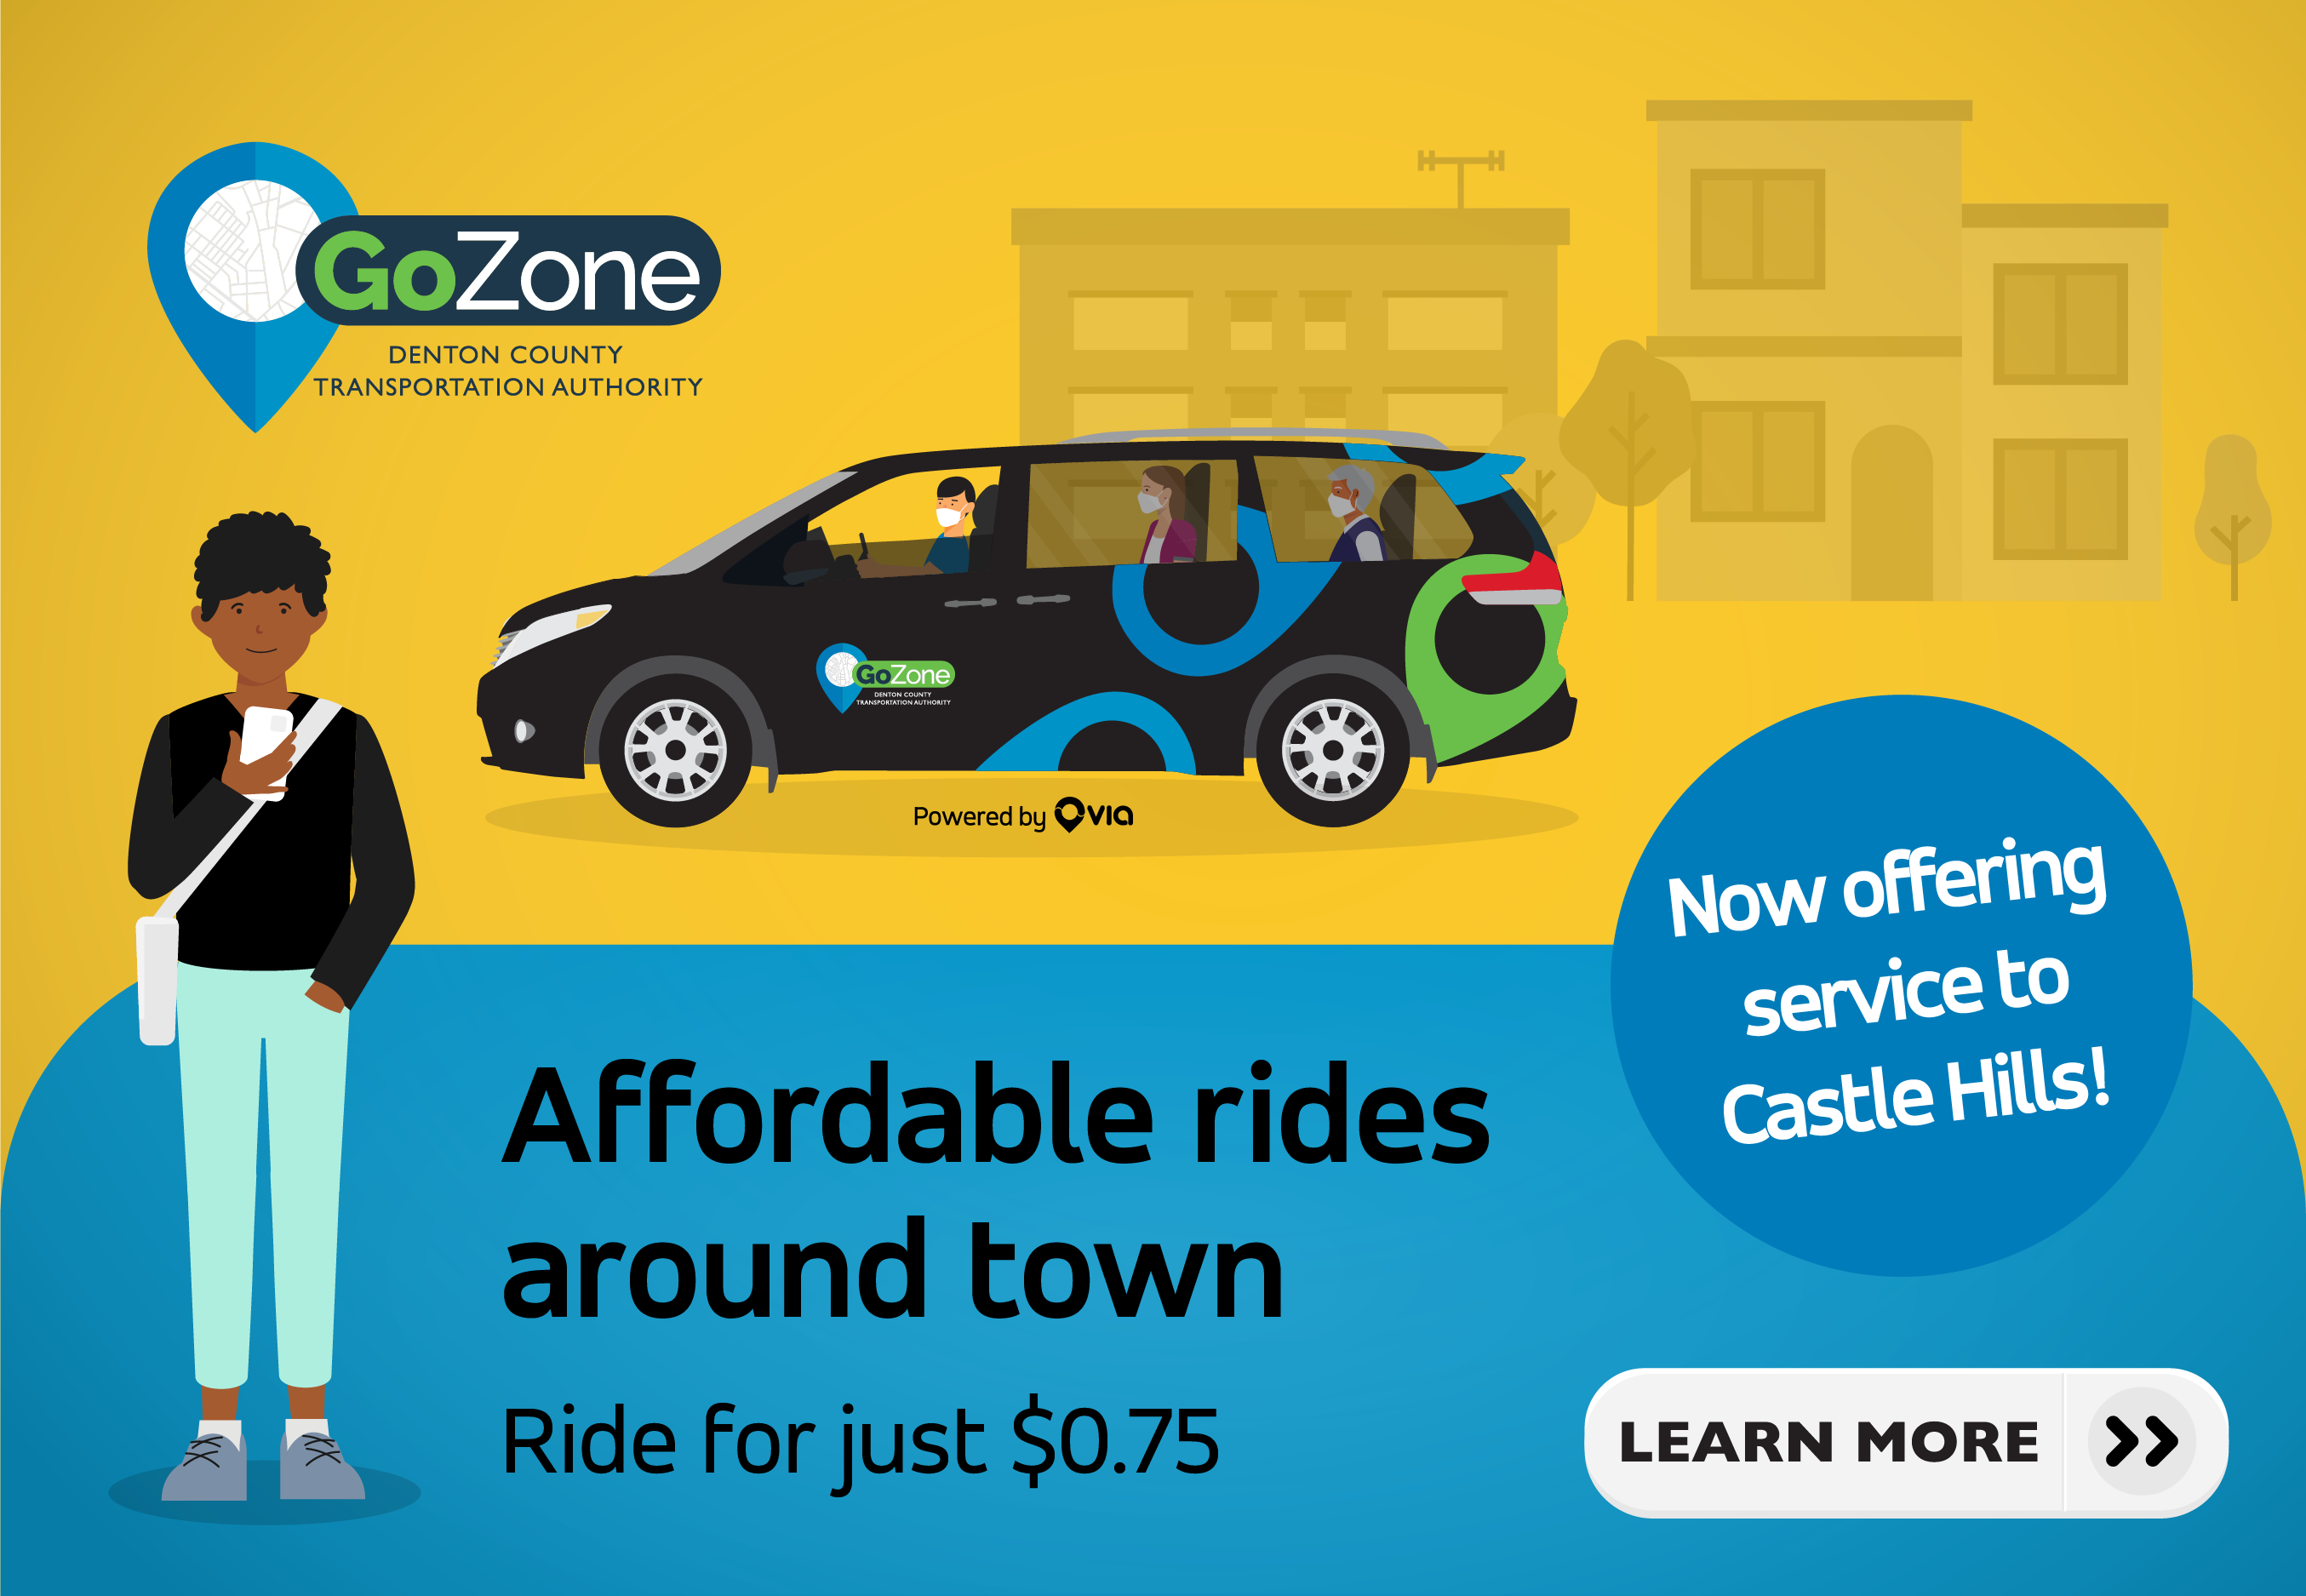 An illustration of a young man next to a GoZone vehicle requesting a ride through his phone with the headline "Affordable rides around town. Ride for just $0.75" and a call-out circle with text "Now offering service to Castle Hills" and a "learn more" button underneath it. 